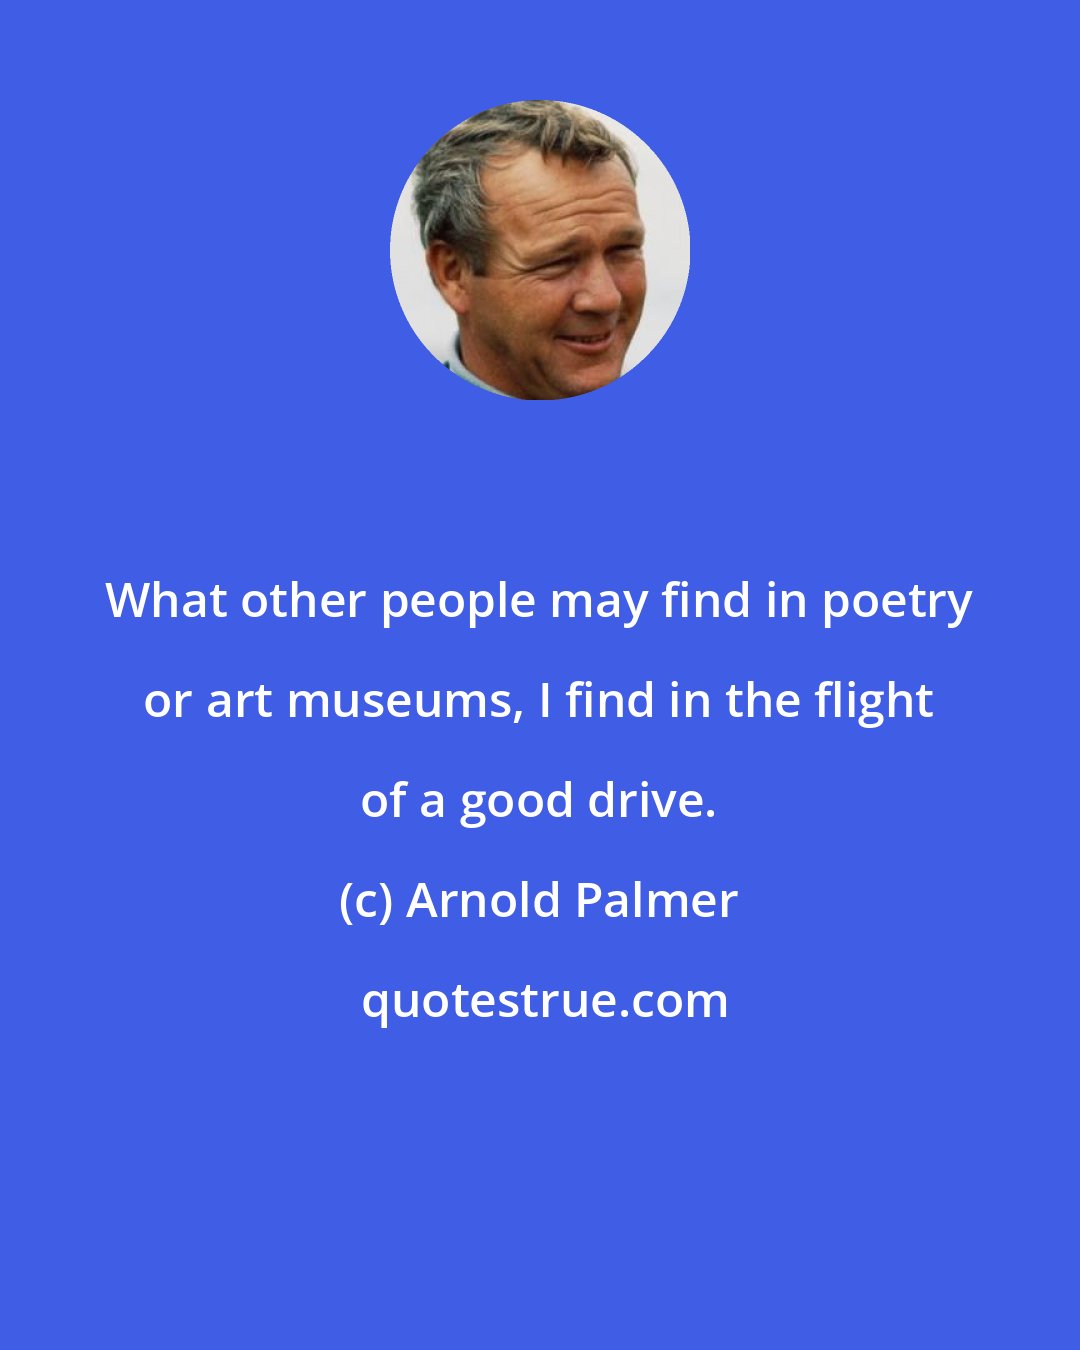 Arnold Palmer: What other people may find in poetry or art museums, I find in the flight of a good drive.